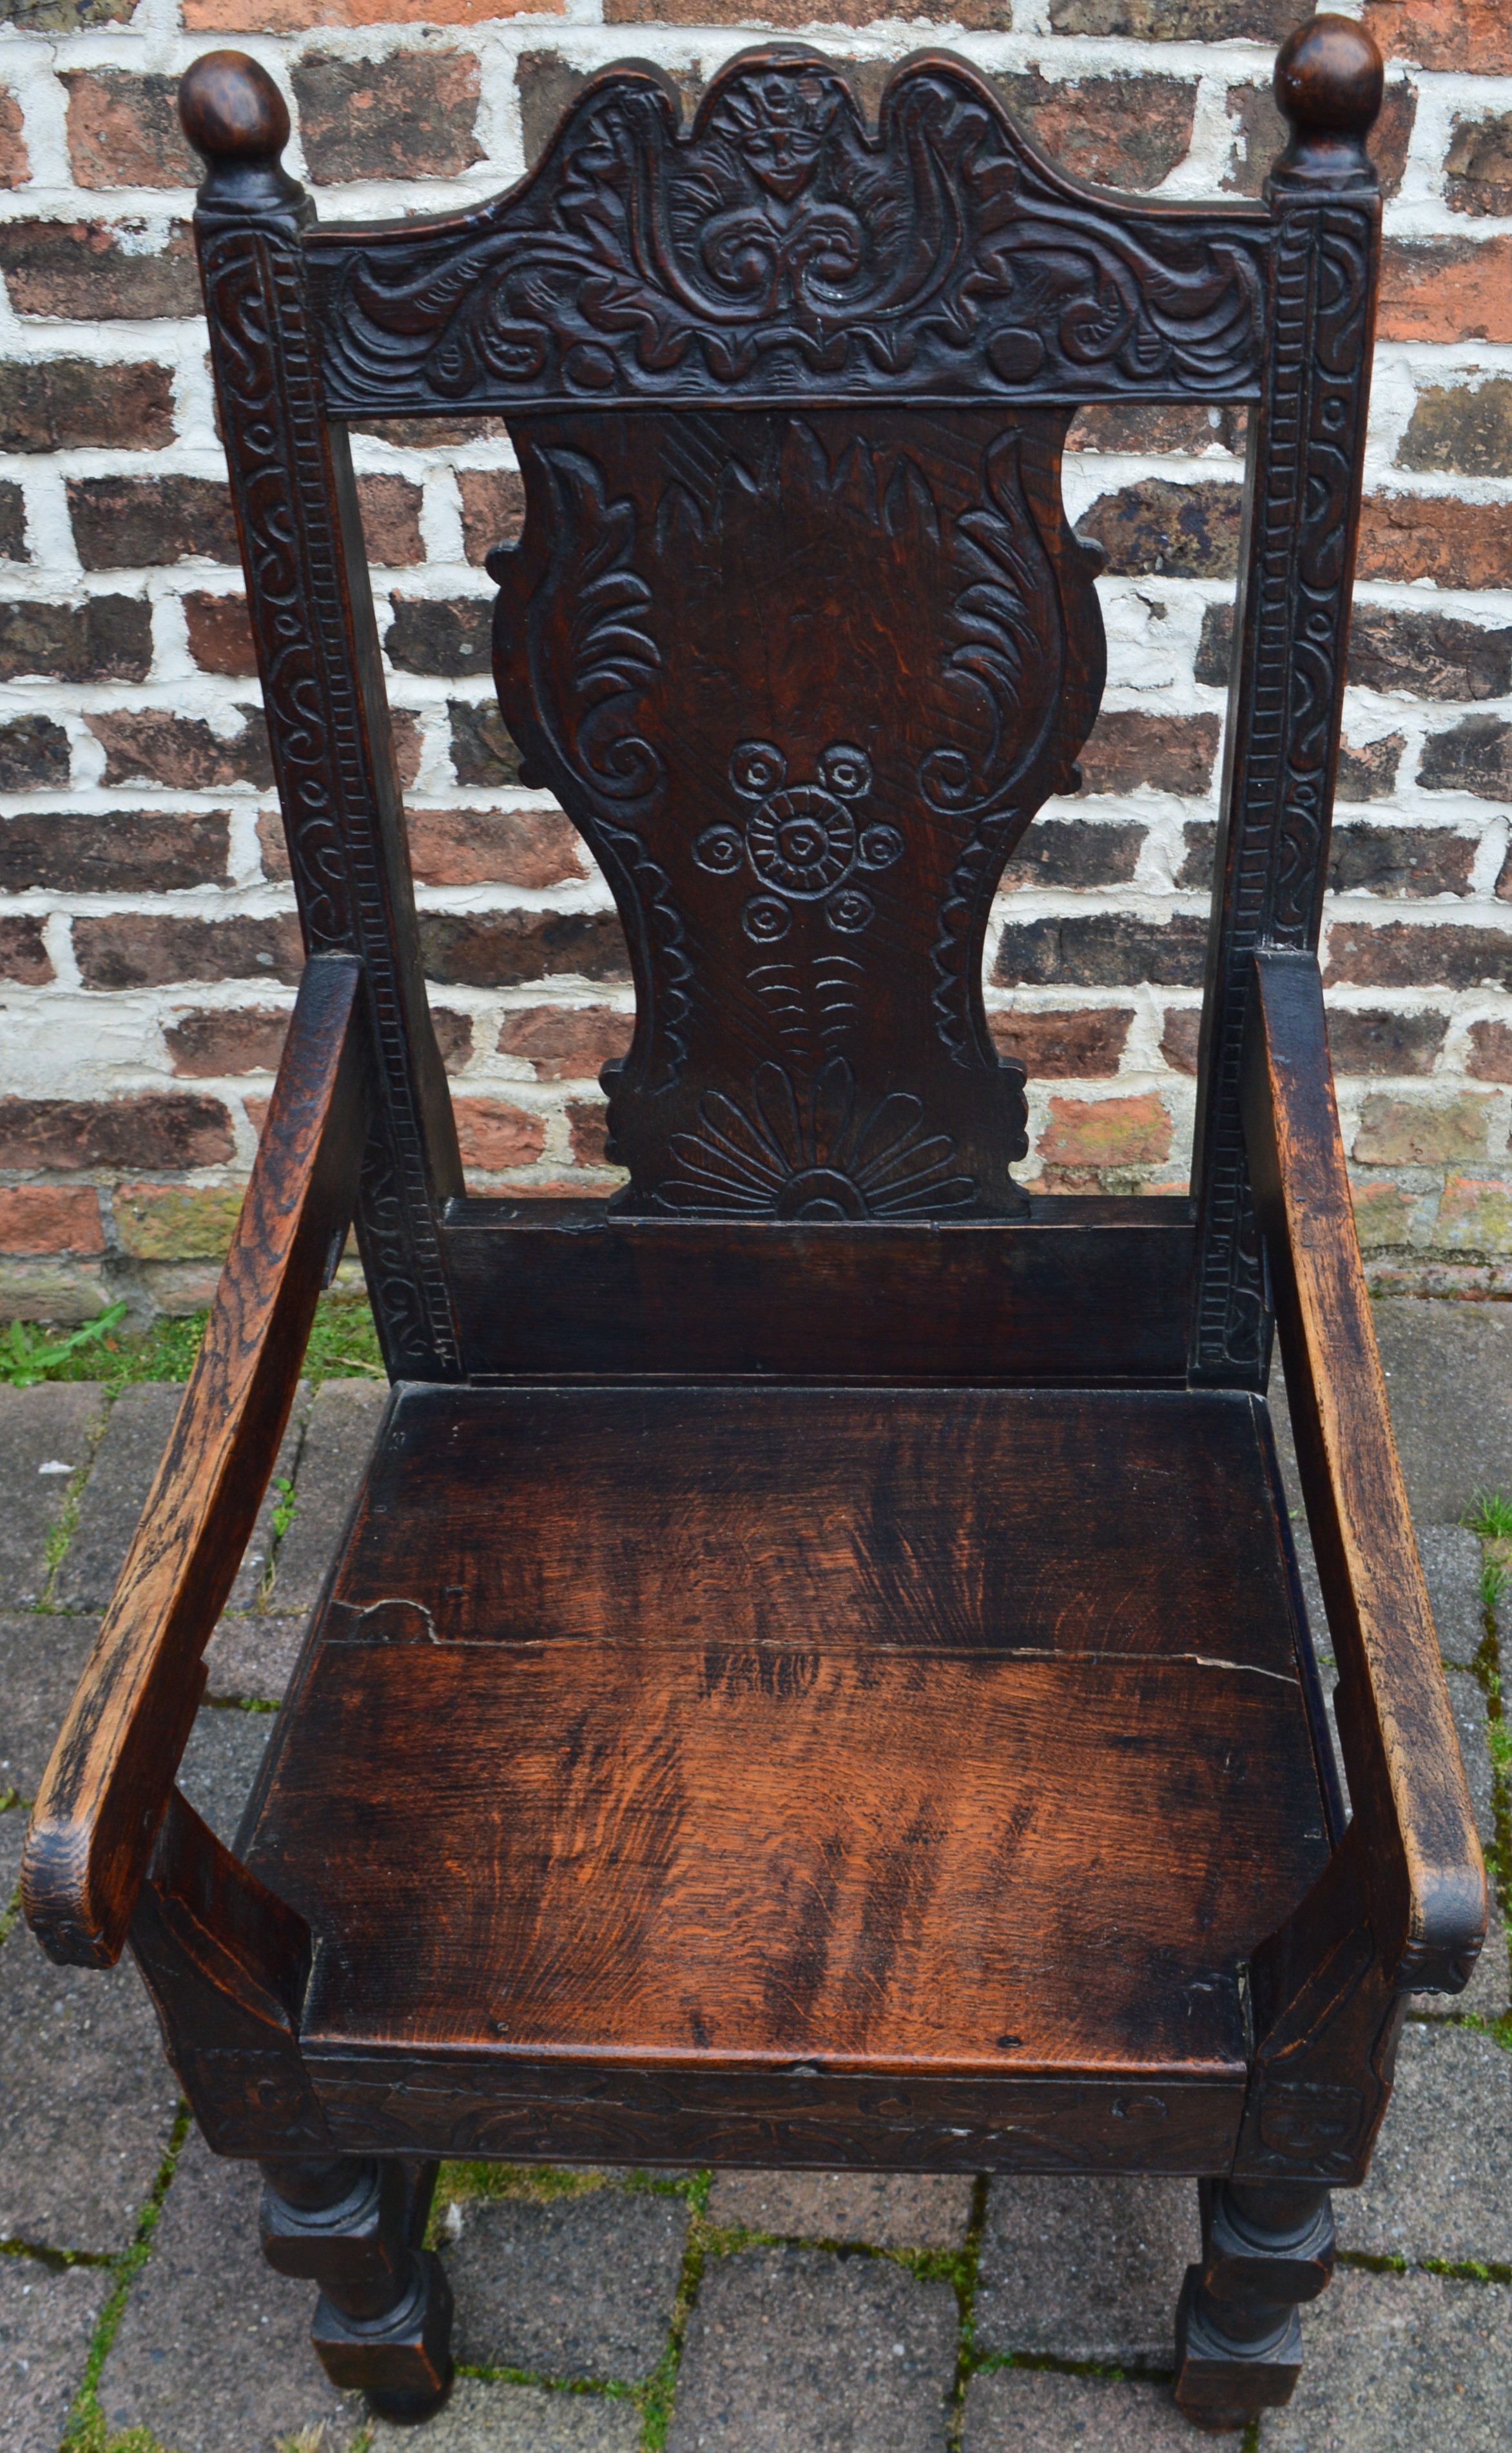 Reproduction 17th century wainscot carved oak chair with loose cushion seat - Image 2 of 3